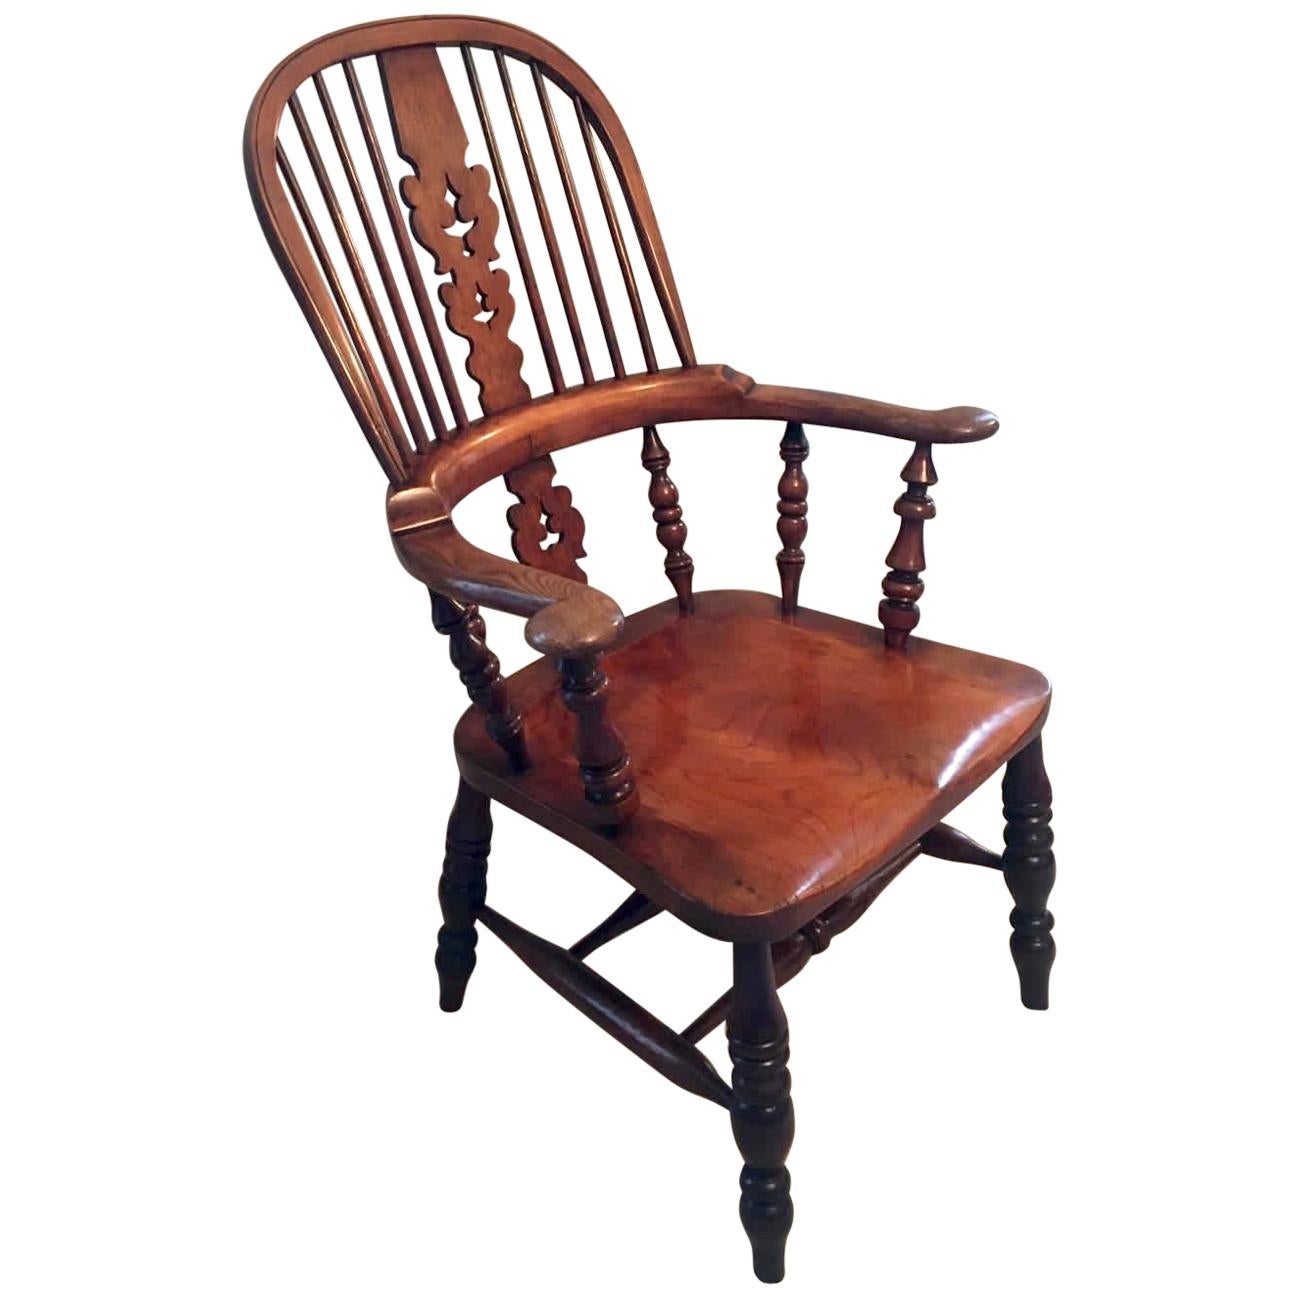 Extra Large Victorian Antique Hoop Back Broad Arm Windsor Chair